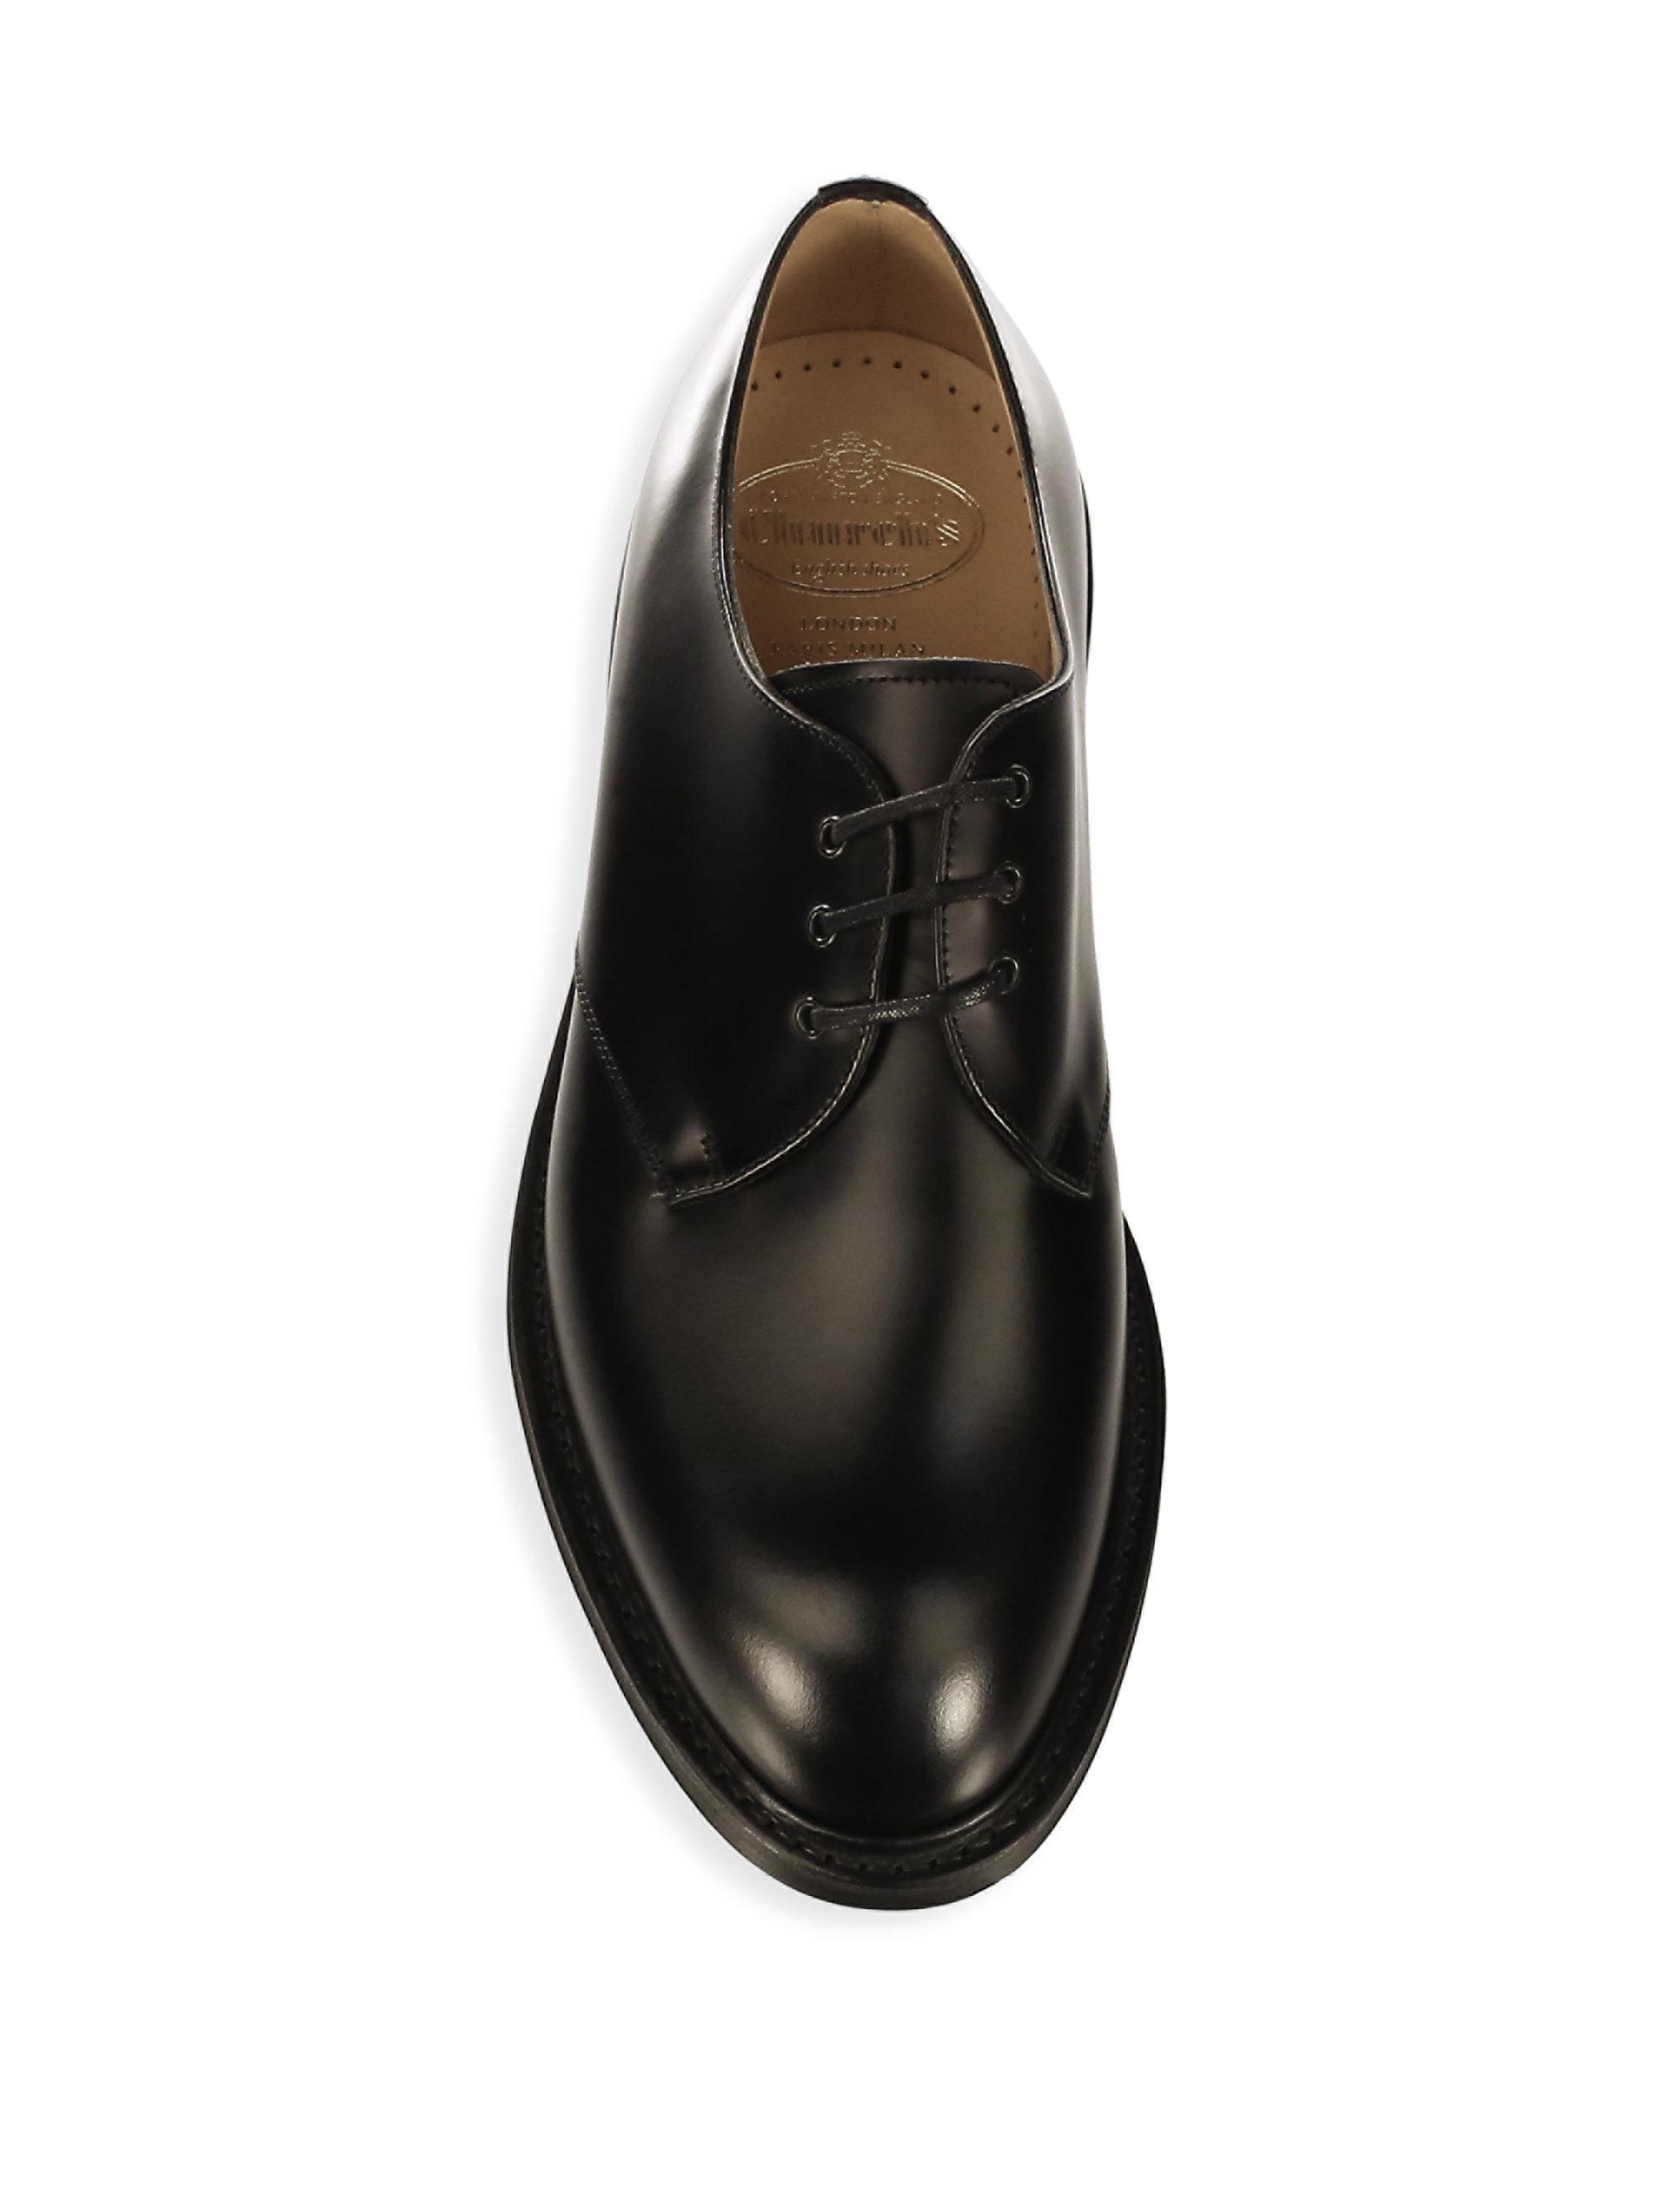 Lyst - Church'S Stance Leather Oxfords in Black for Men